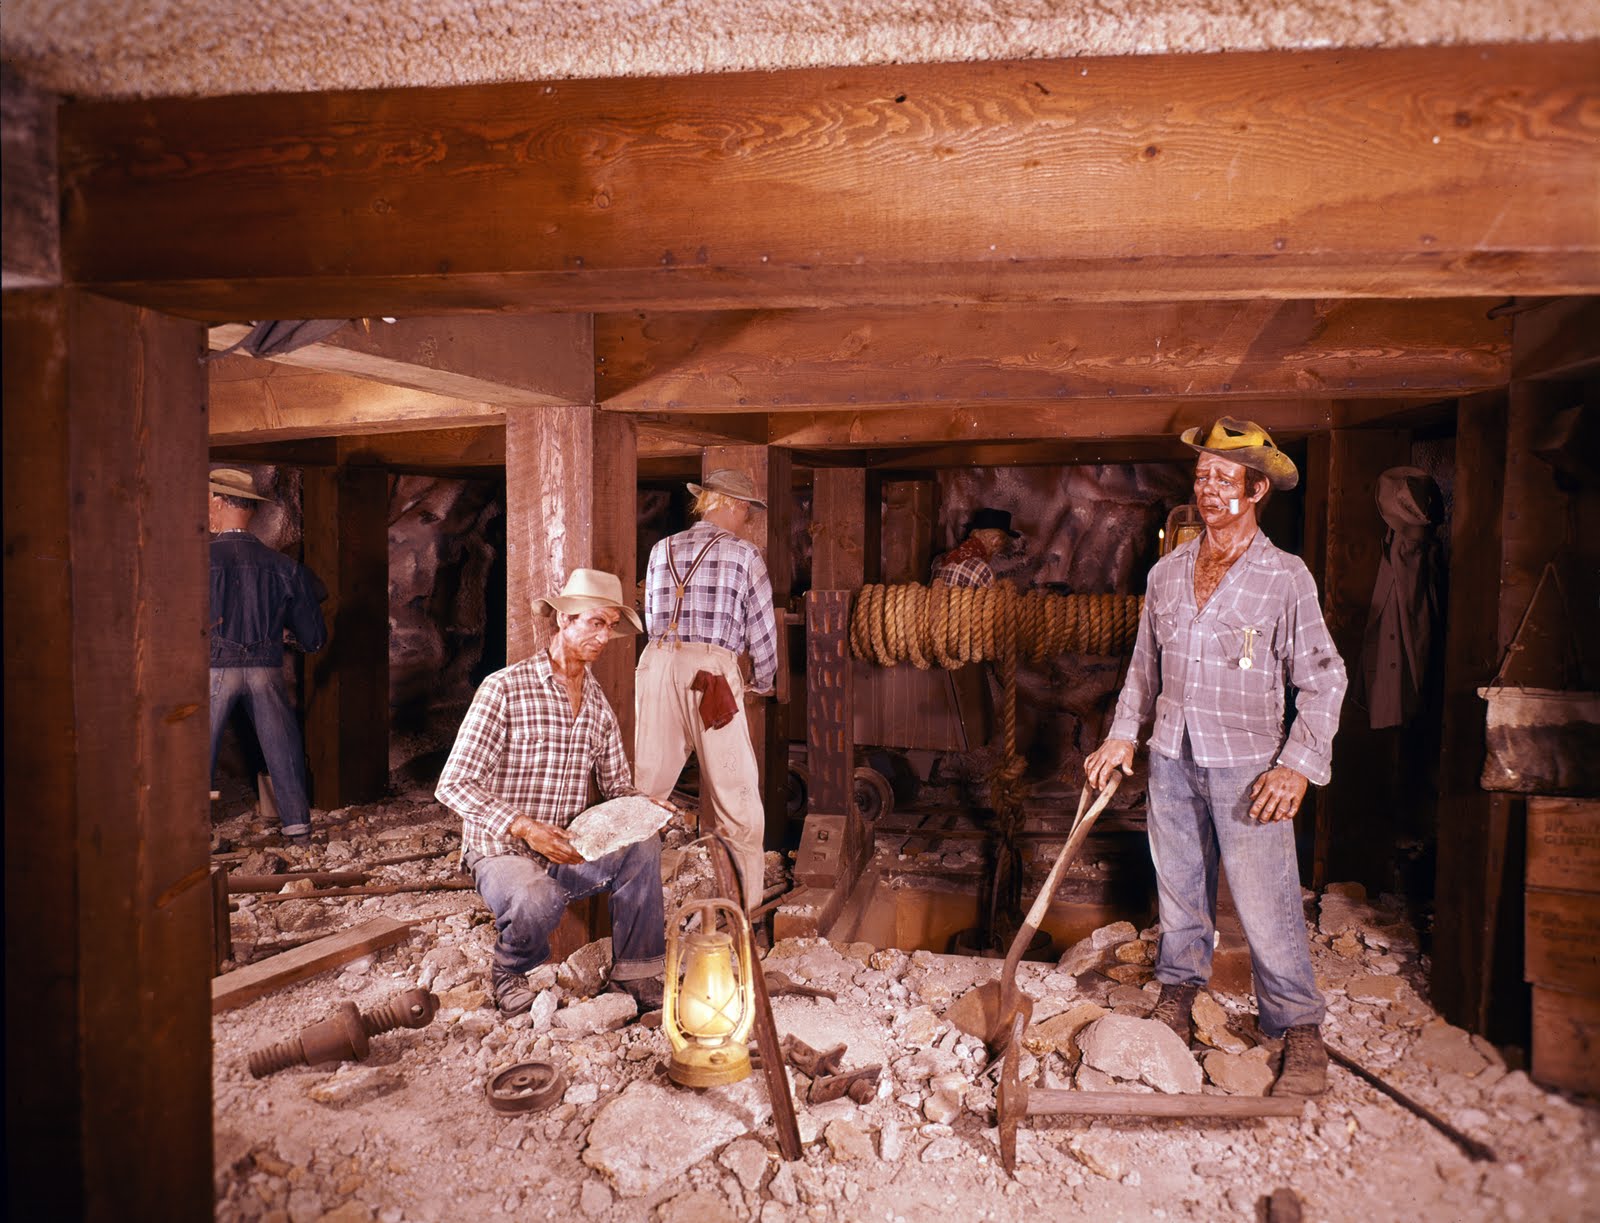 several men are working in a room that appears to be under construction